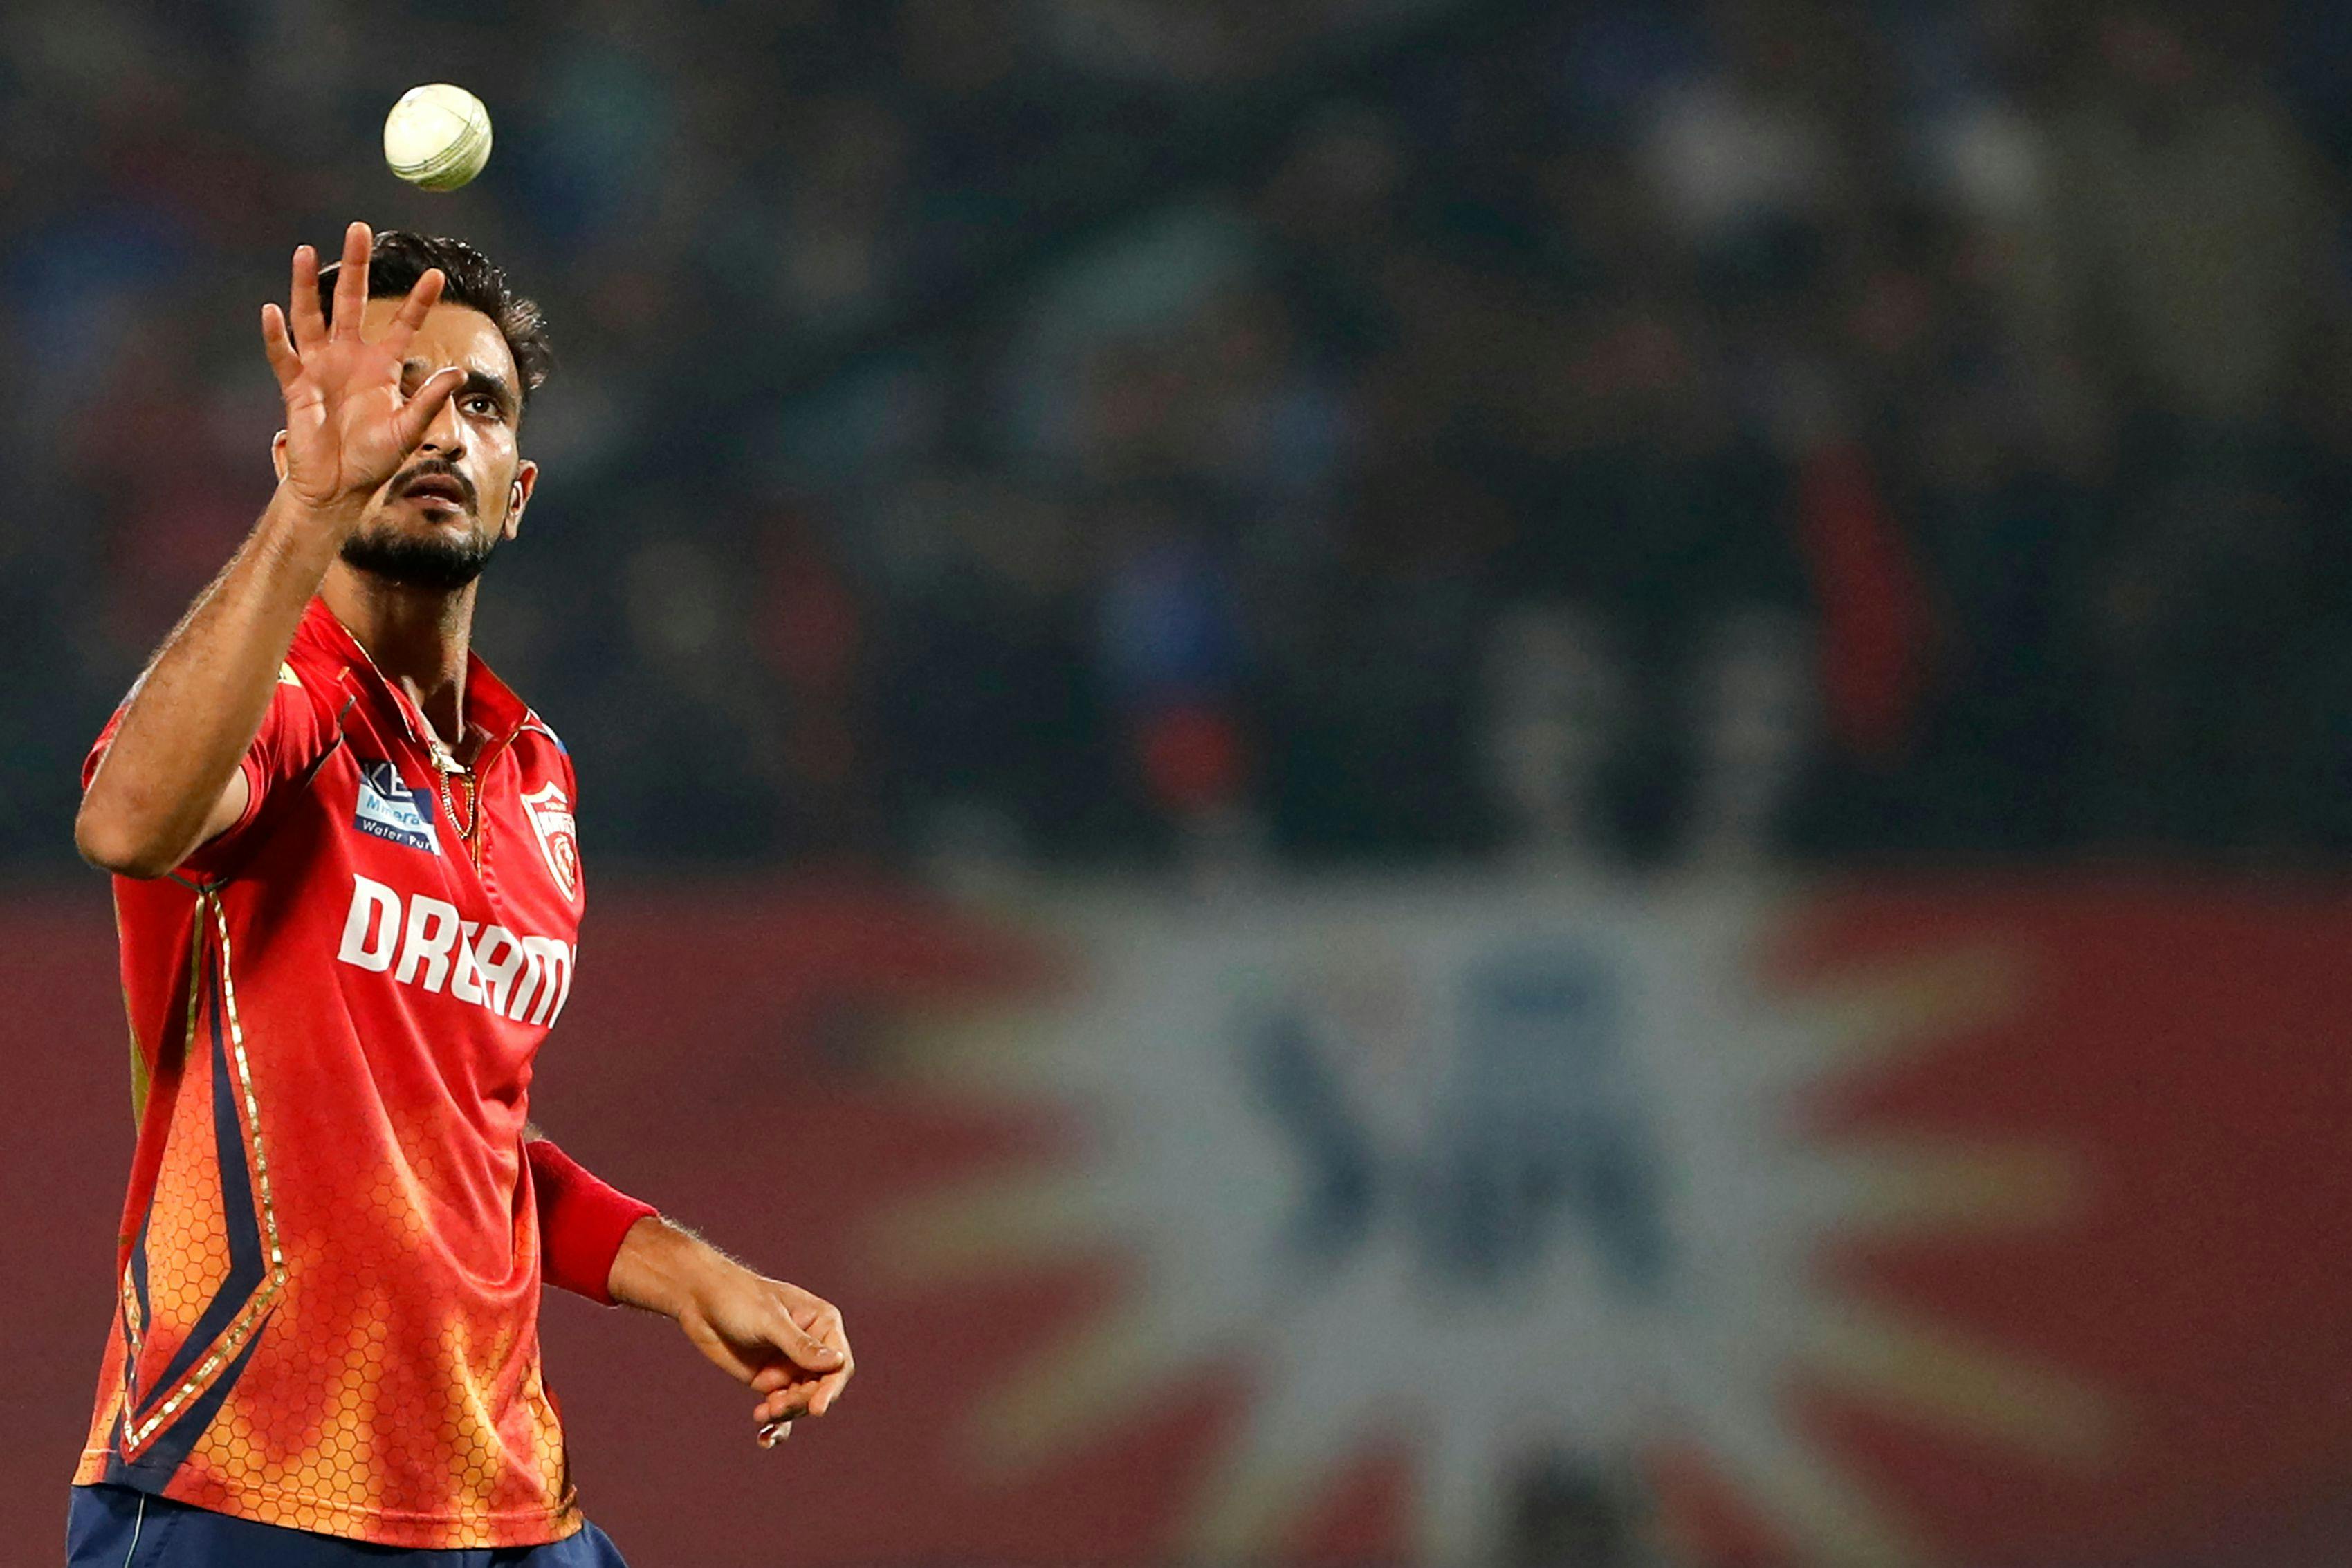 Punjab Kings' Harshal Patel catches the ball during the Indian Premier League 